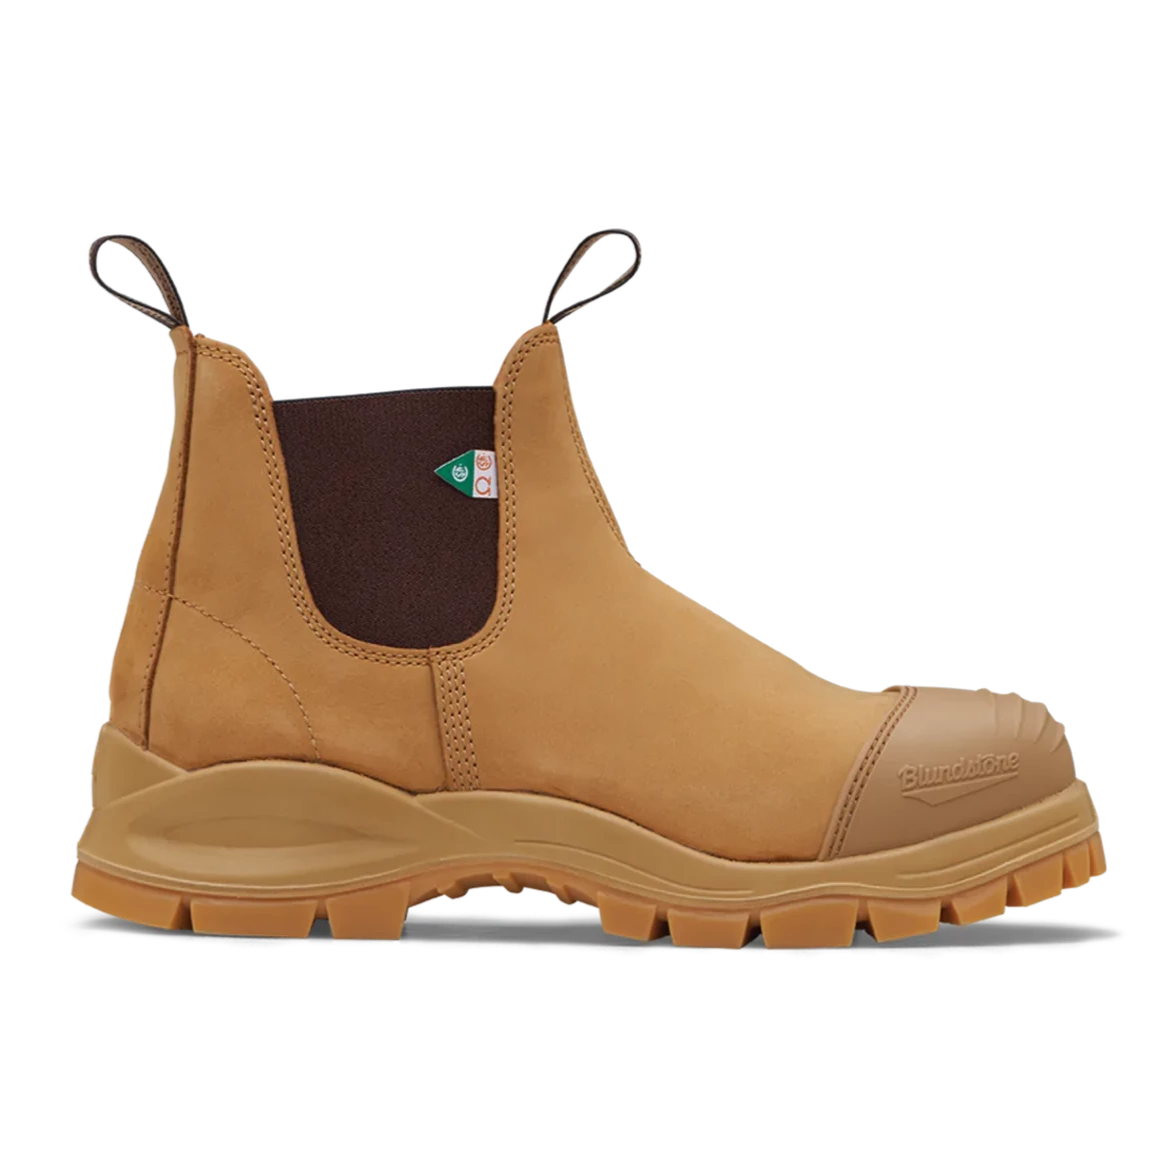 Blundstone #960 - XFR CSA Work and Safety boot wheat side